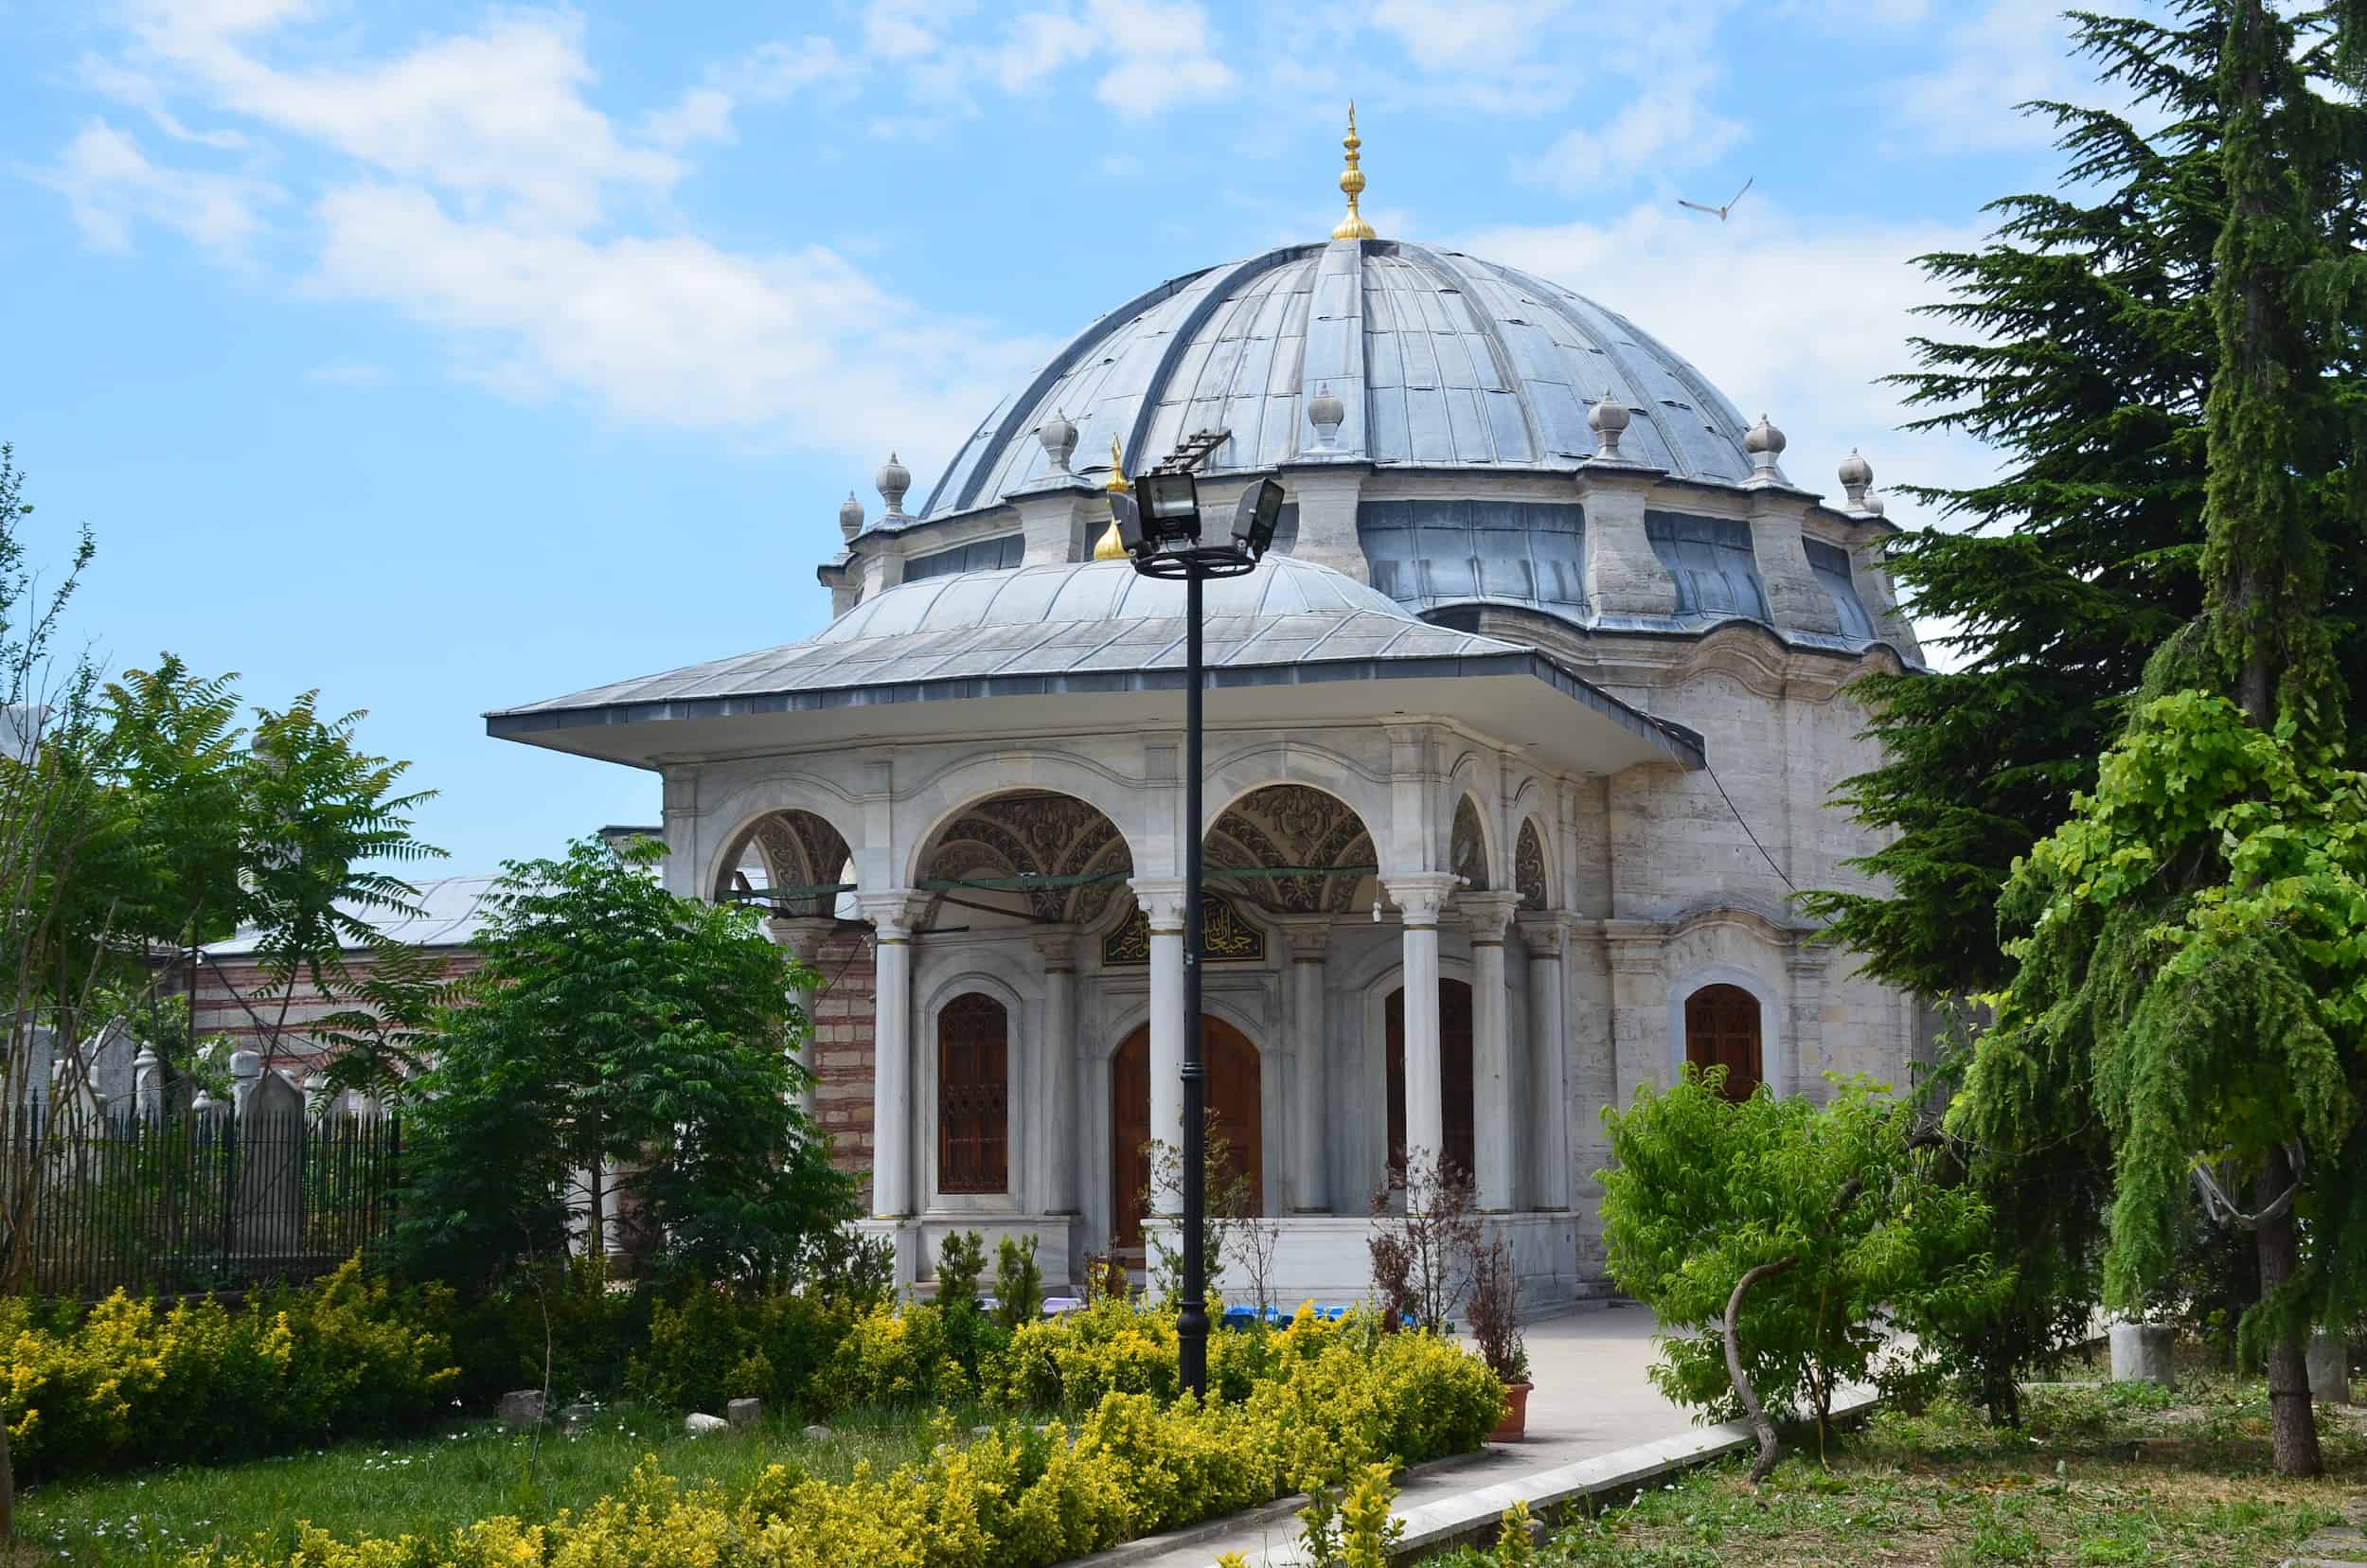 Tomb of Nakşidil Sultan at the Fatih Mosque Complex in Istanbul, Turkey